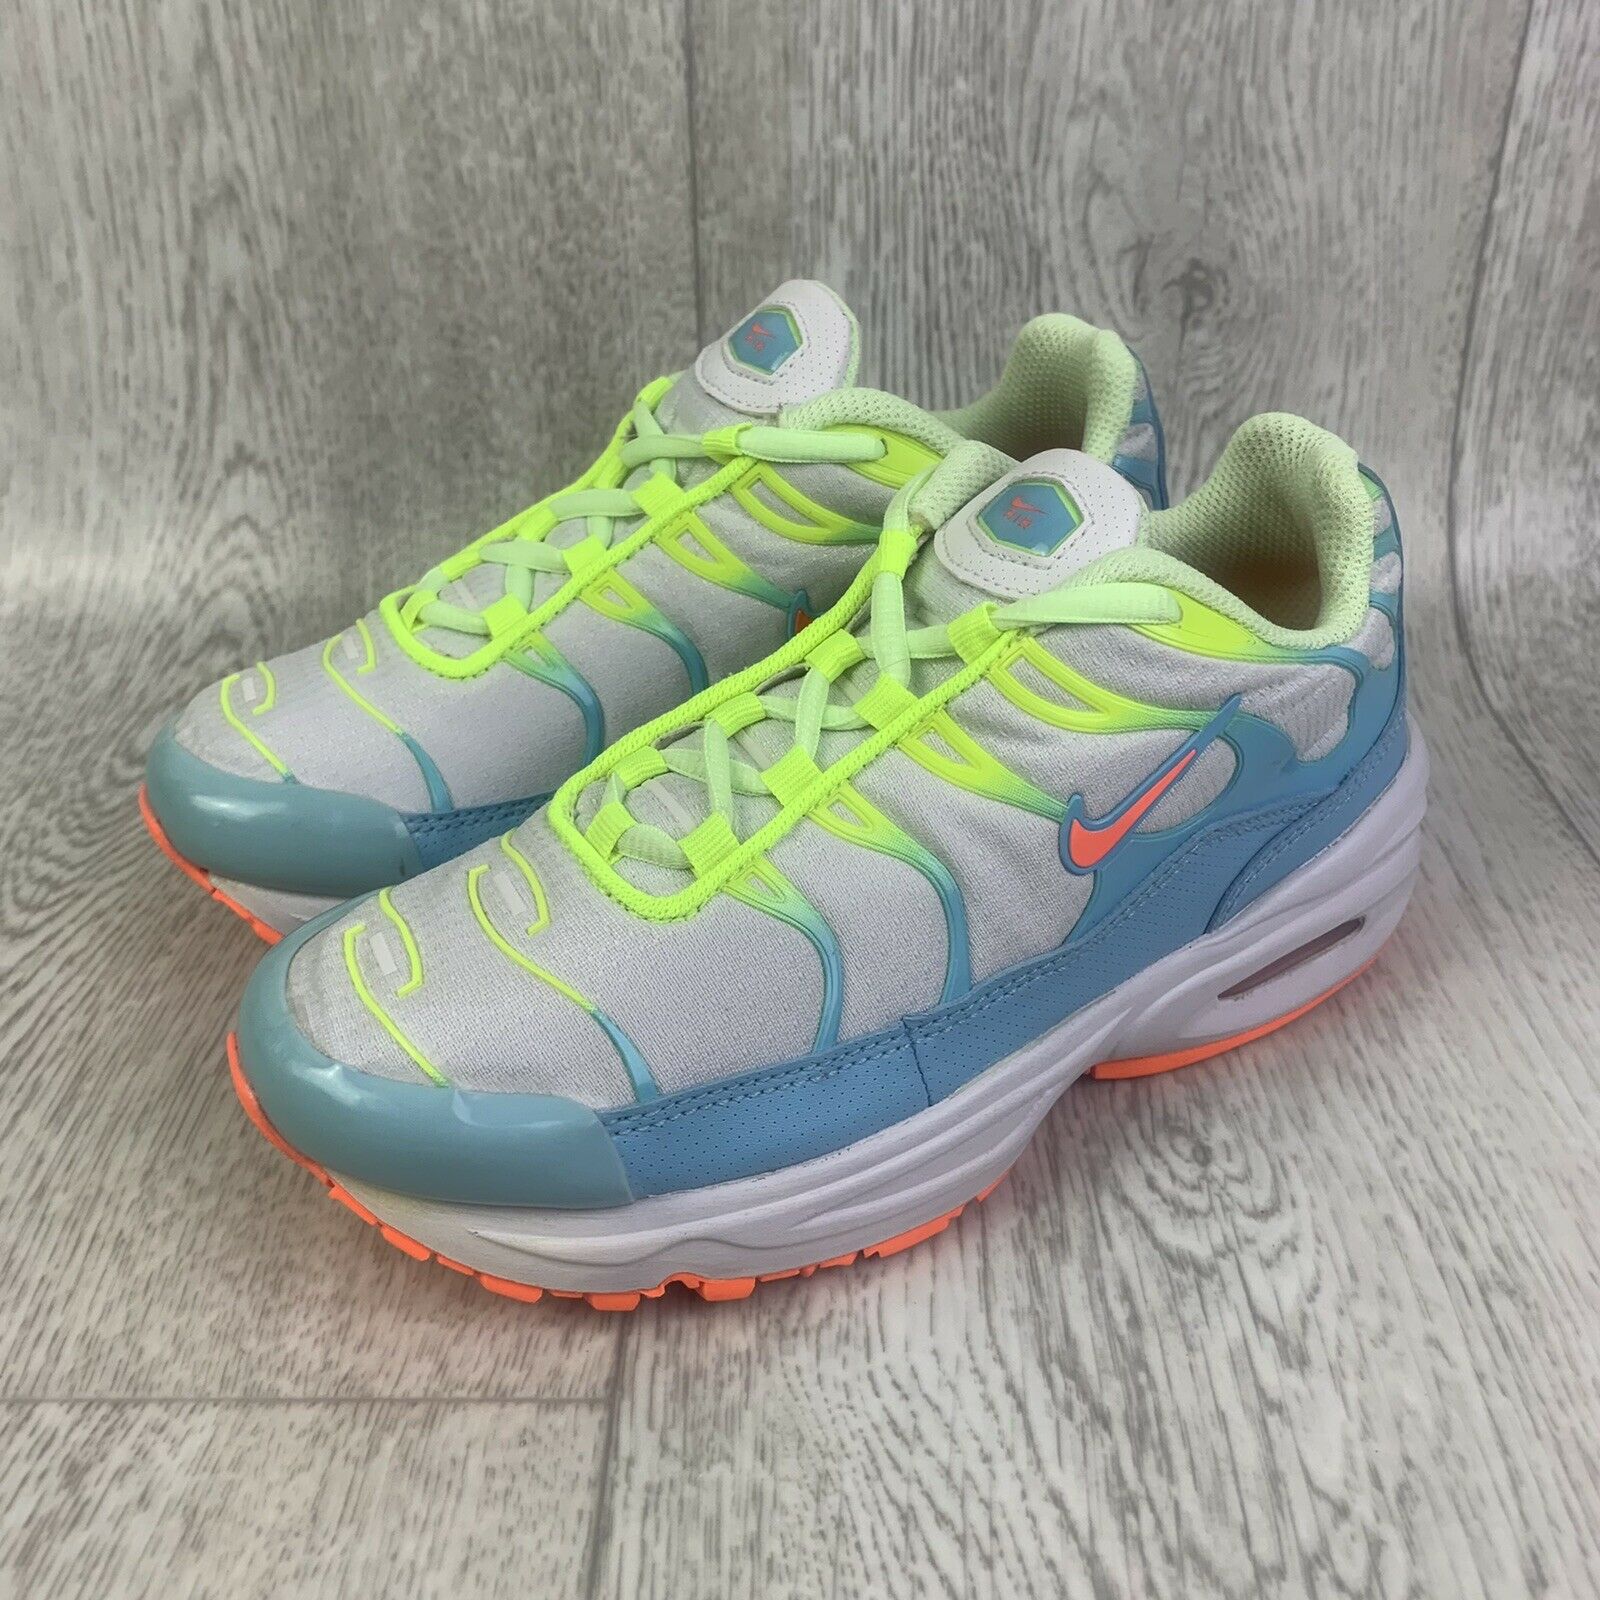 Nike Air Max White & Volt Youth Running Shoes Size 2Y Model CJ9933-400